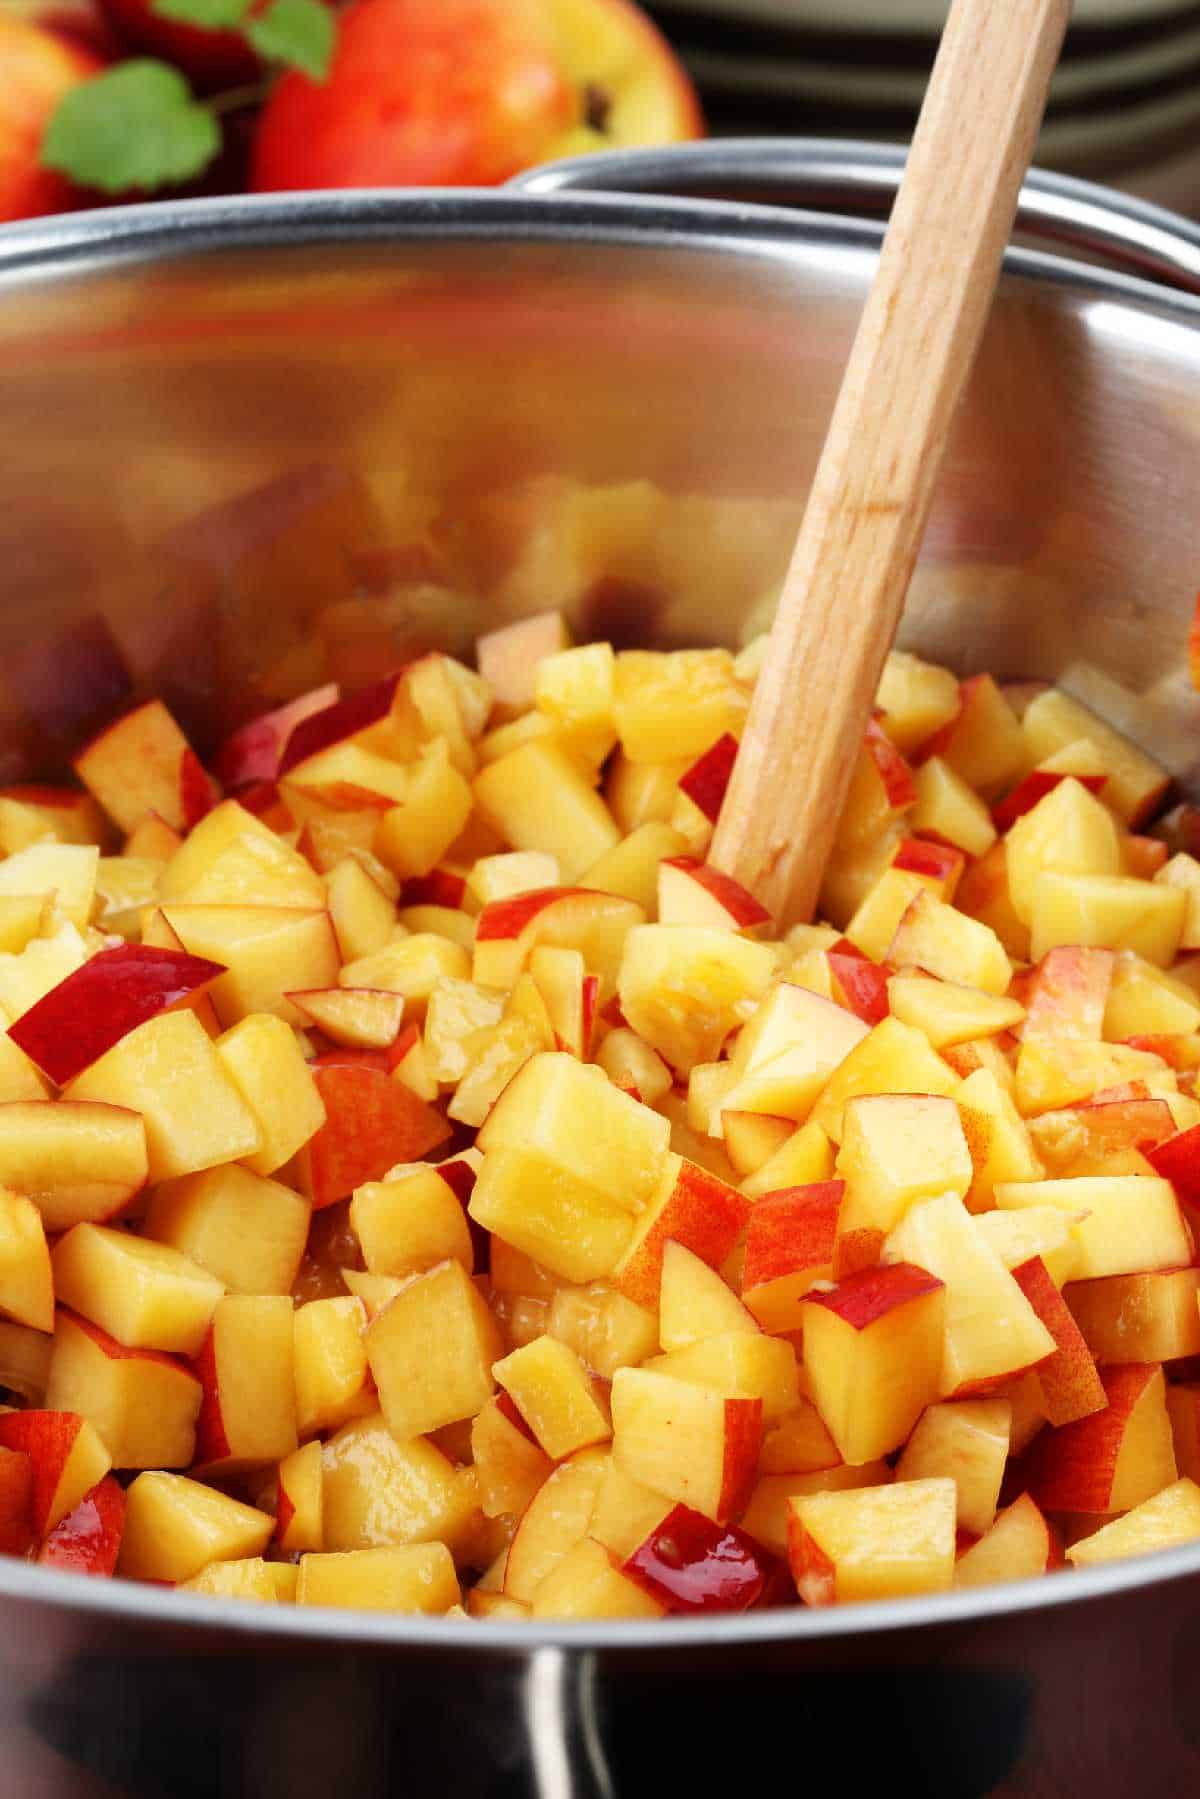 stock pot full of diced peaches and a wooden spoon to stir.